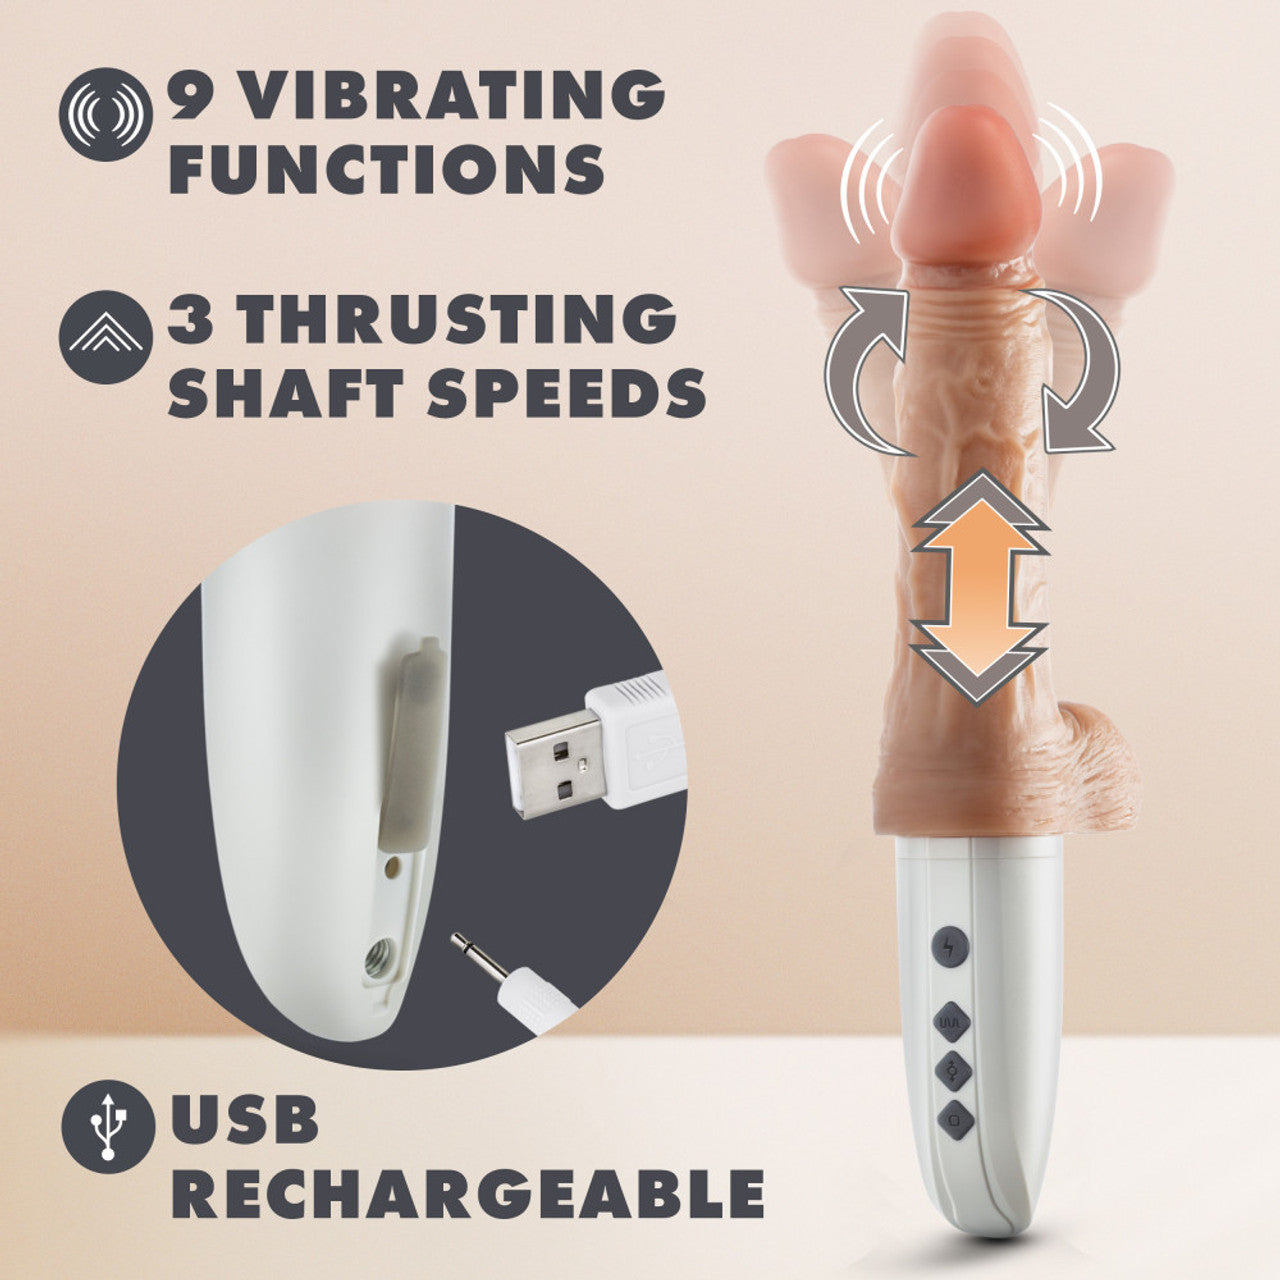 Dr. Hammer 7" Silicone Thrusting Dildo with Handle - Beige